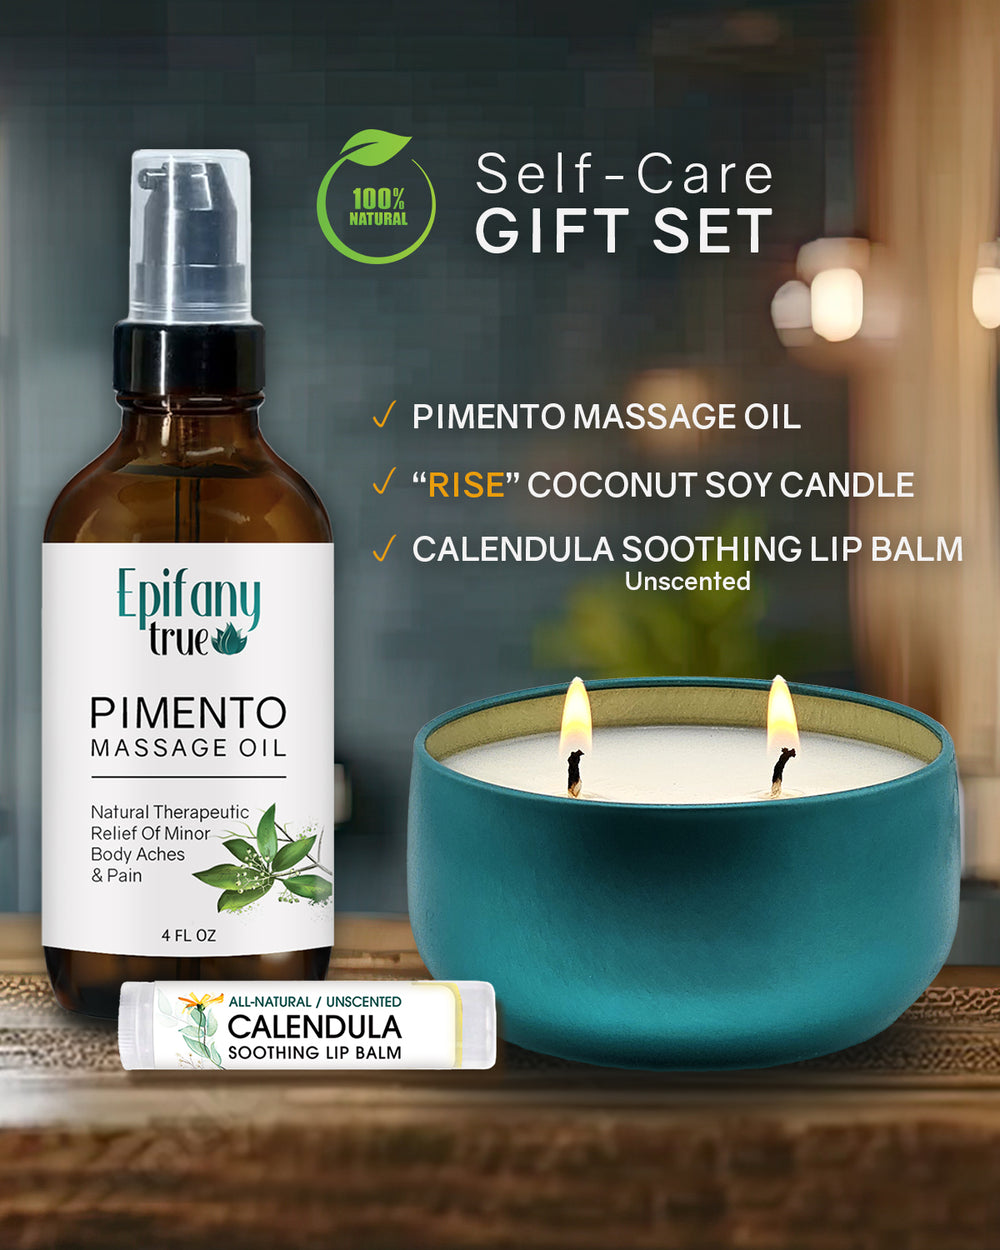 Pimento Massage Oil 4oz, Calendula Soothing Lip Balm, Rise Coconut Soy Candle with Essential Oils, Self-Care Gift 3-Piece Bundle